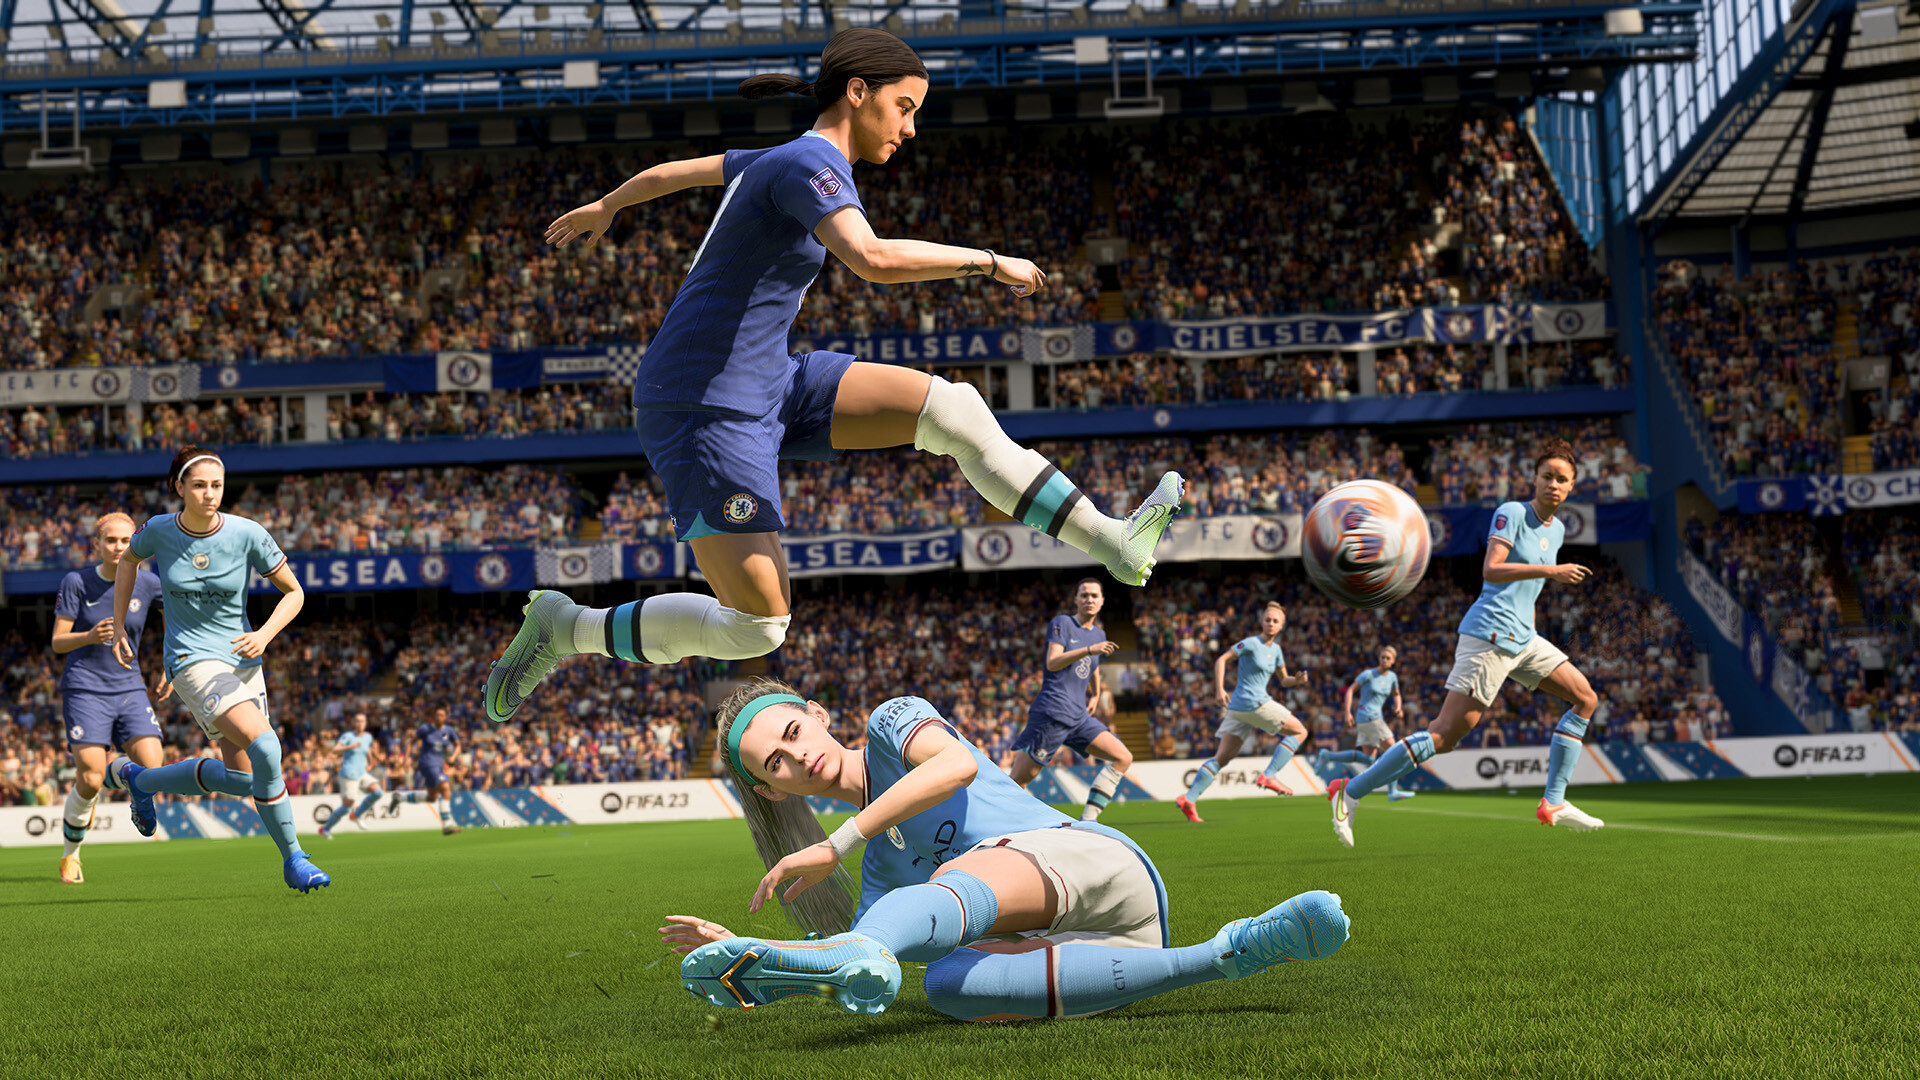 Womens football match in FIFA 23